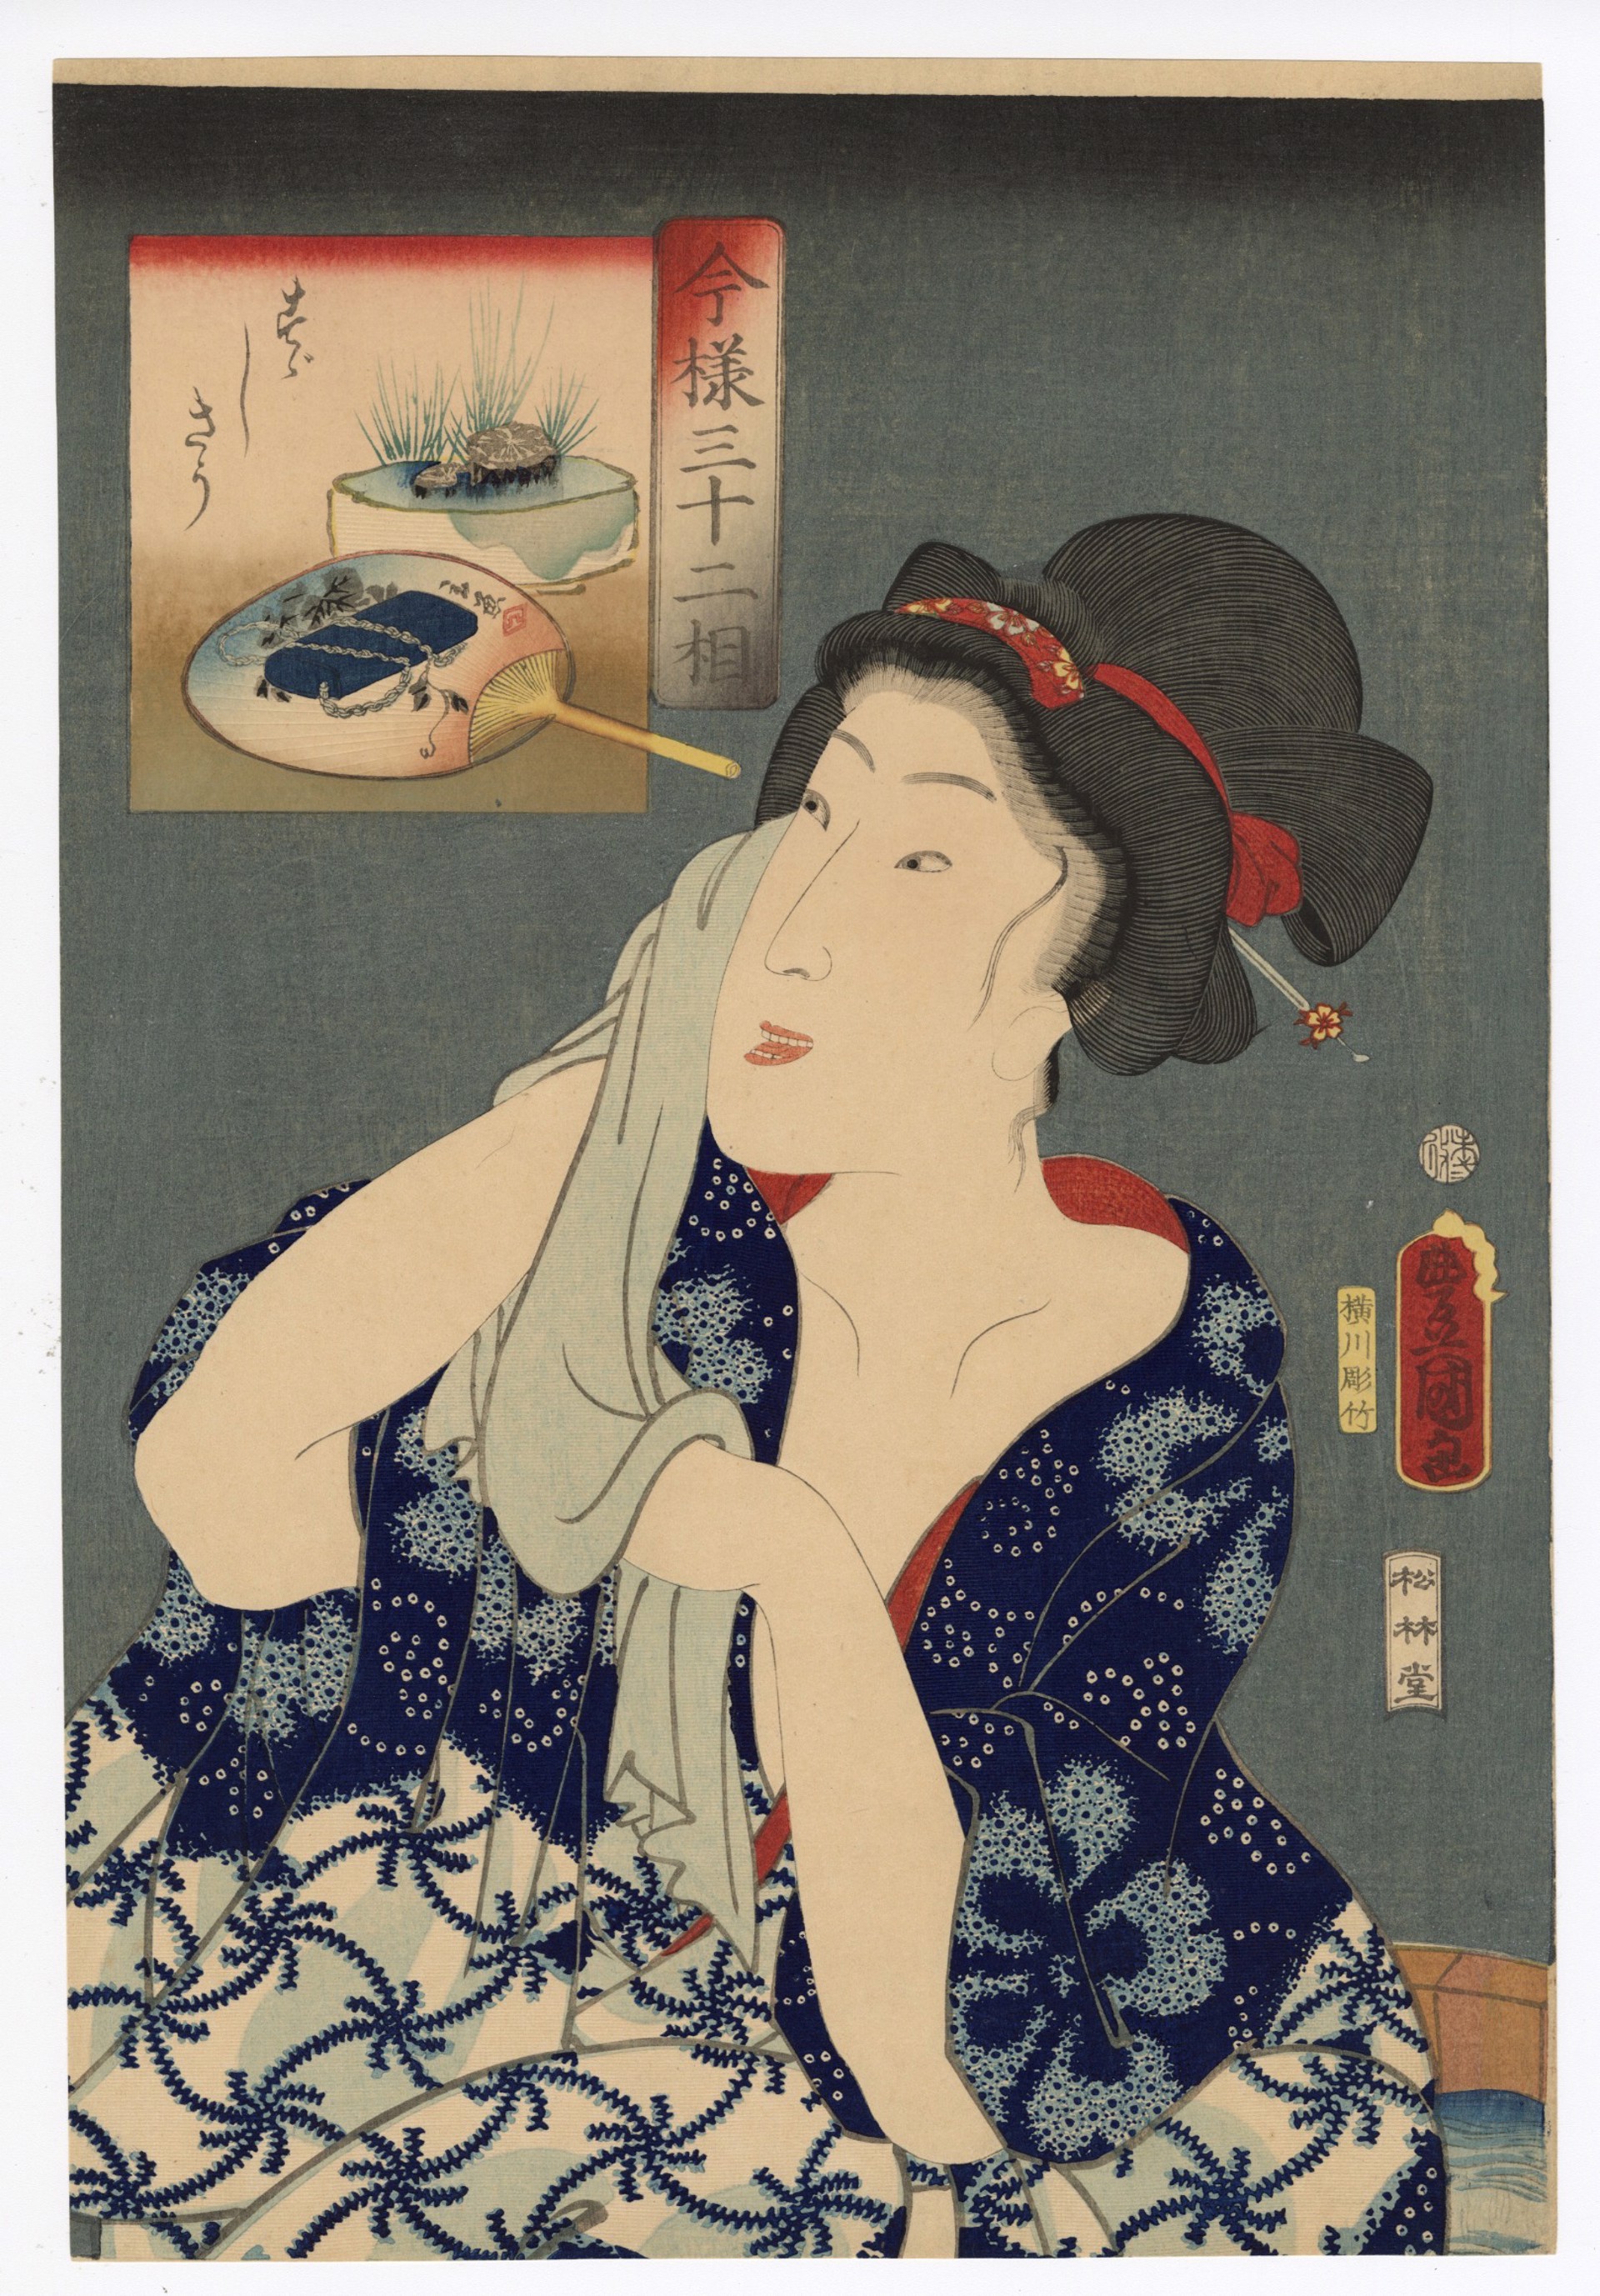 The Cool Type by Kunisada